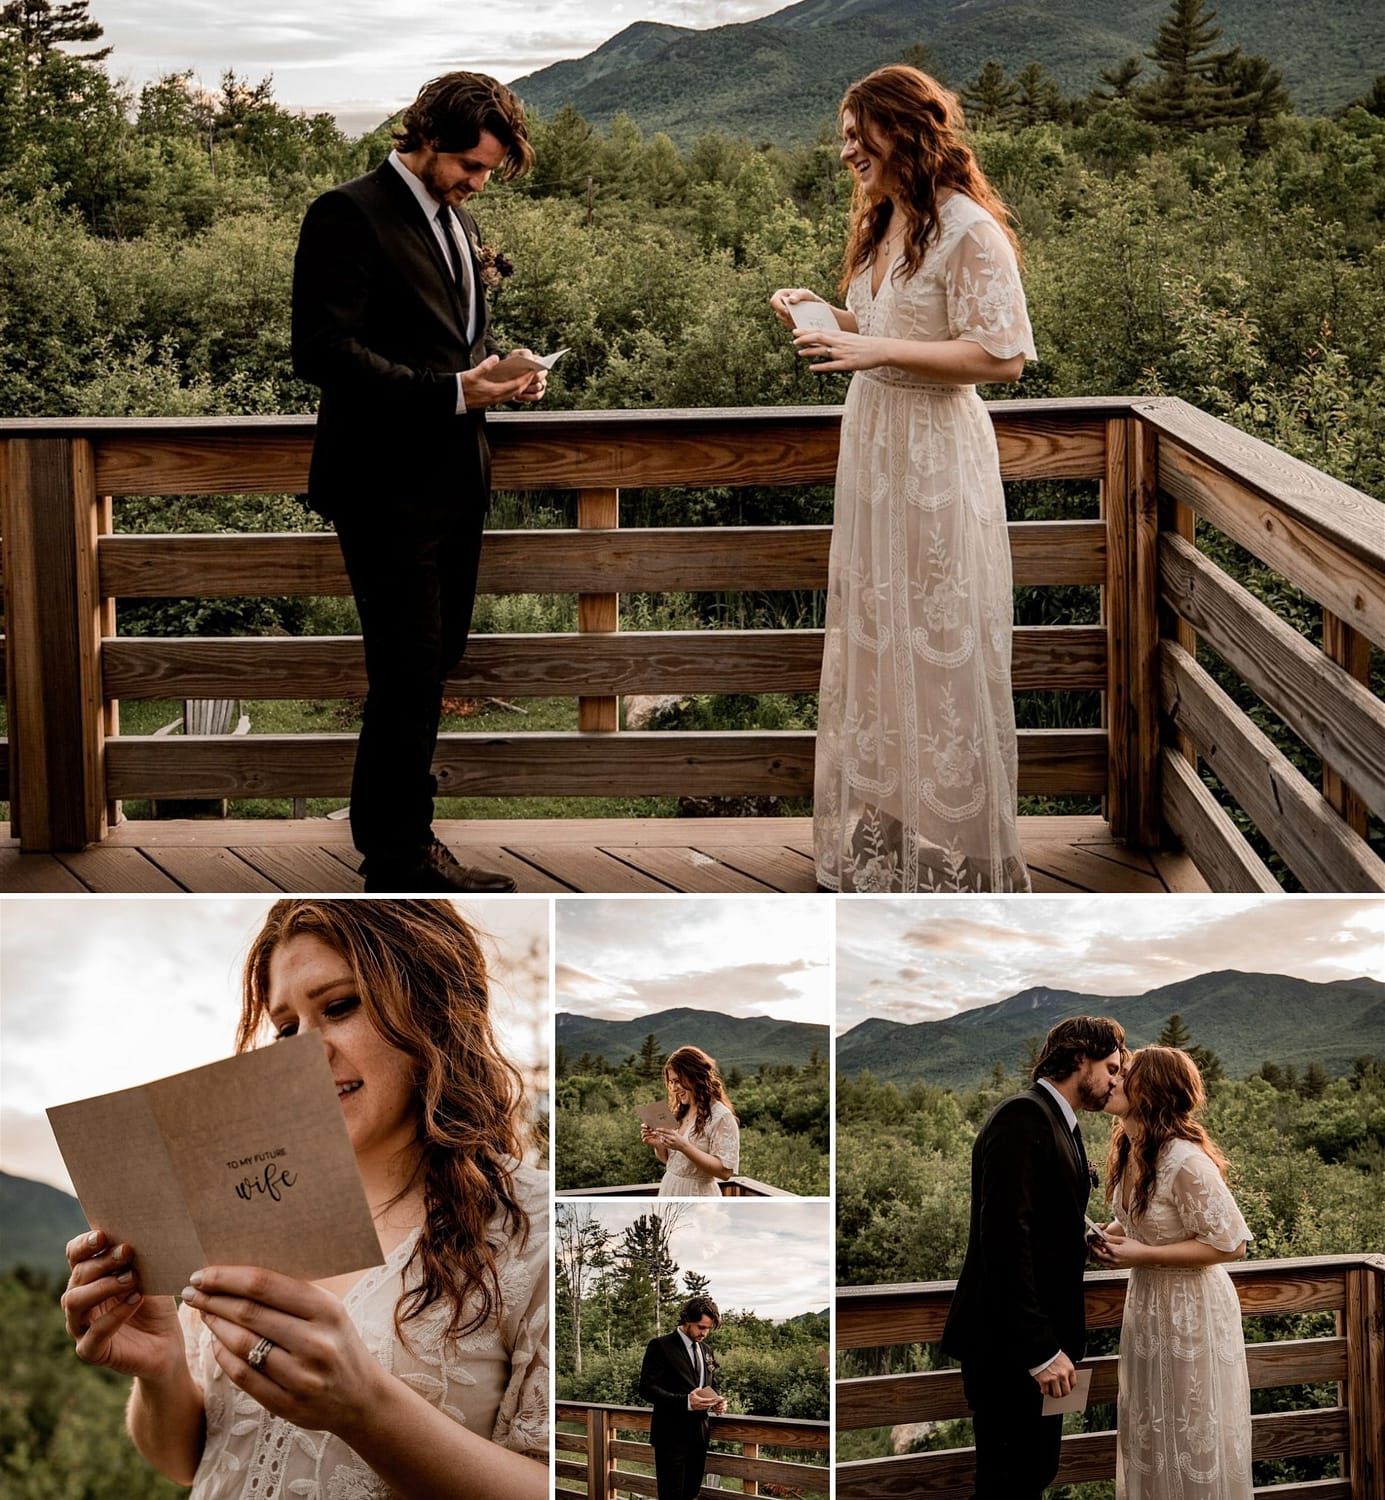 Adorable photos of the bride and groom at this Whiteface Mountain elopement